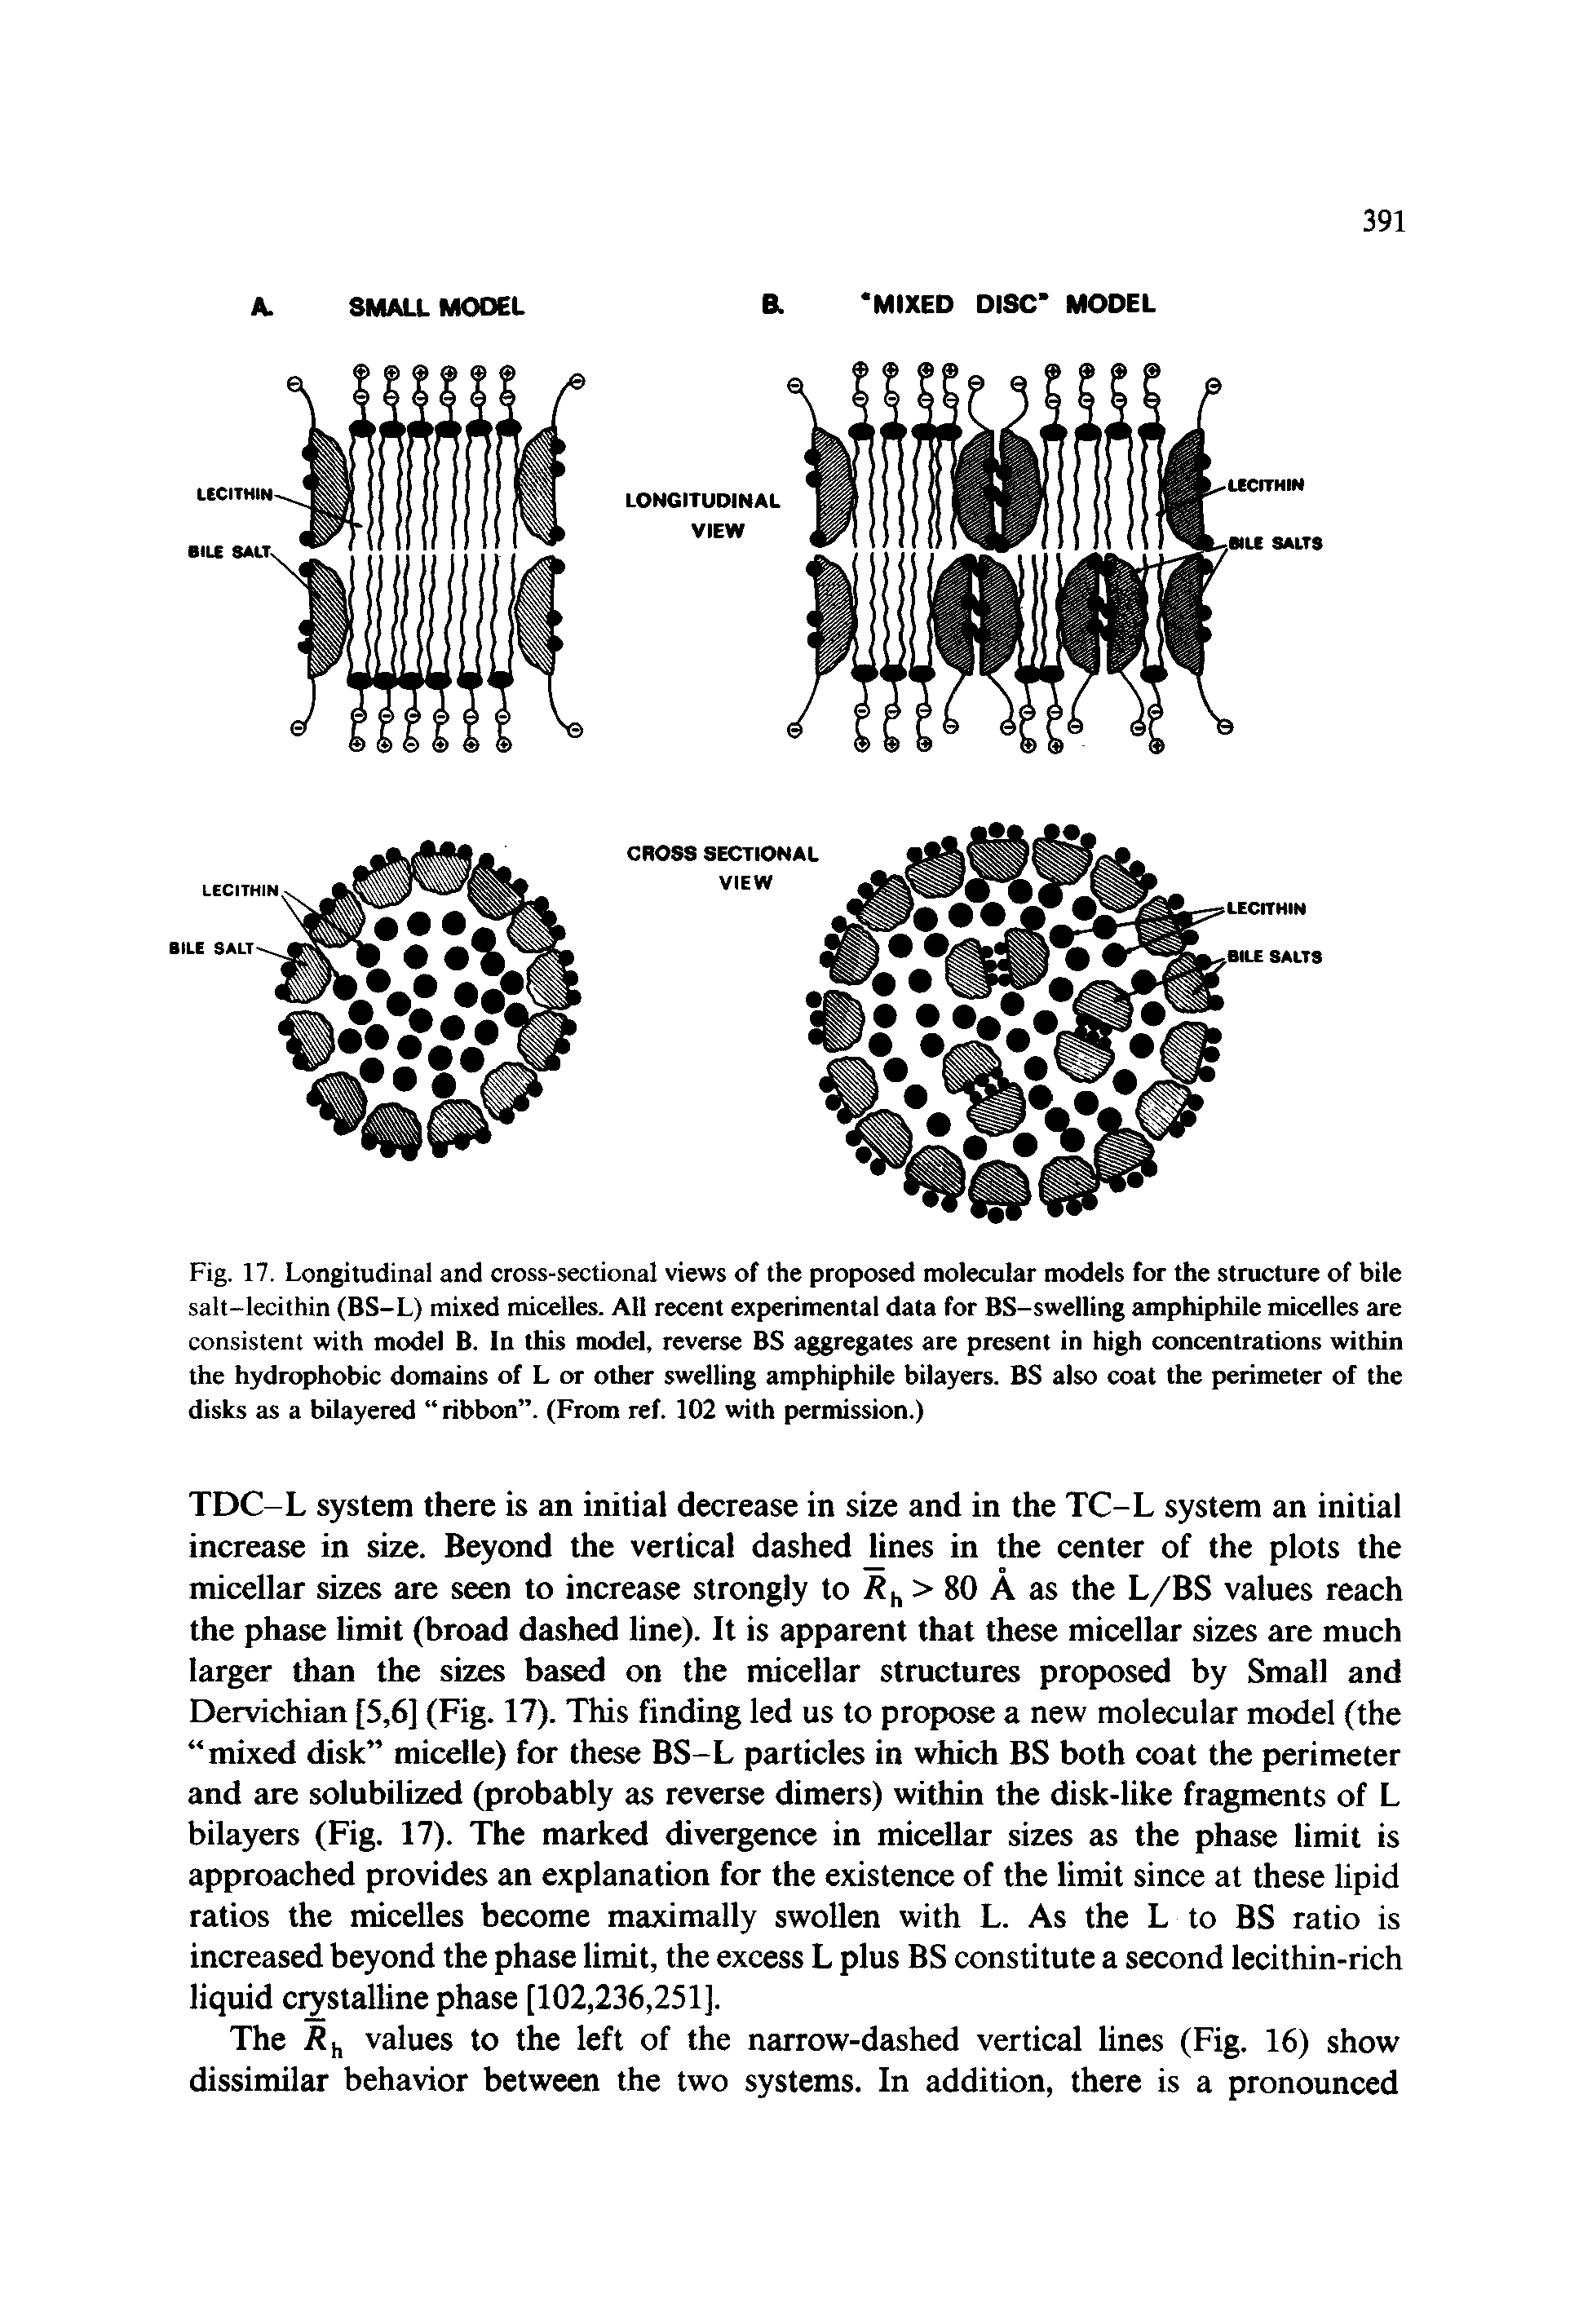 Fig. 17. Longitudinal and cross-sectional views of the proposed molecular models for the structure of bile salt-lecithin (BS-L) mixed micelles. All recent experimental data for BS-swelling amphiphile micelles are consistent with model B. In this model, reverse BS aggregates are present in high concentrations within the hydrophobic domains of L or other swelling amphiphile bilayers. BS also coat the perimeter of the disks as a bilayered ribbon . (From ref. 102 with permission.)...